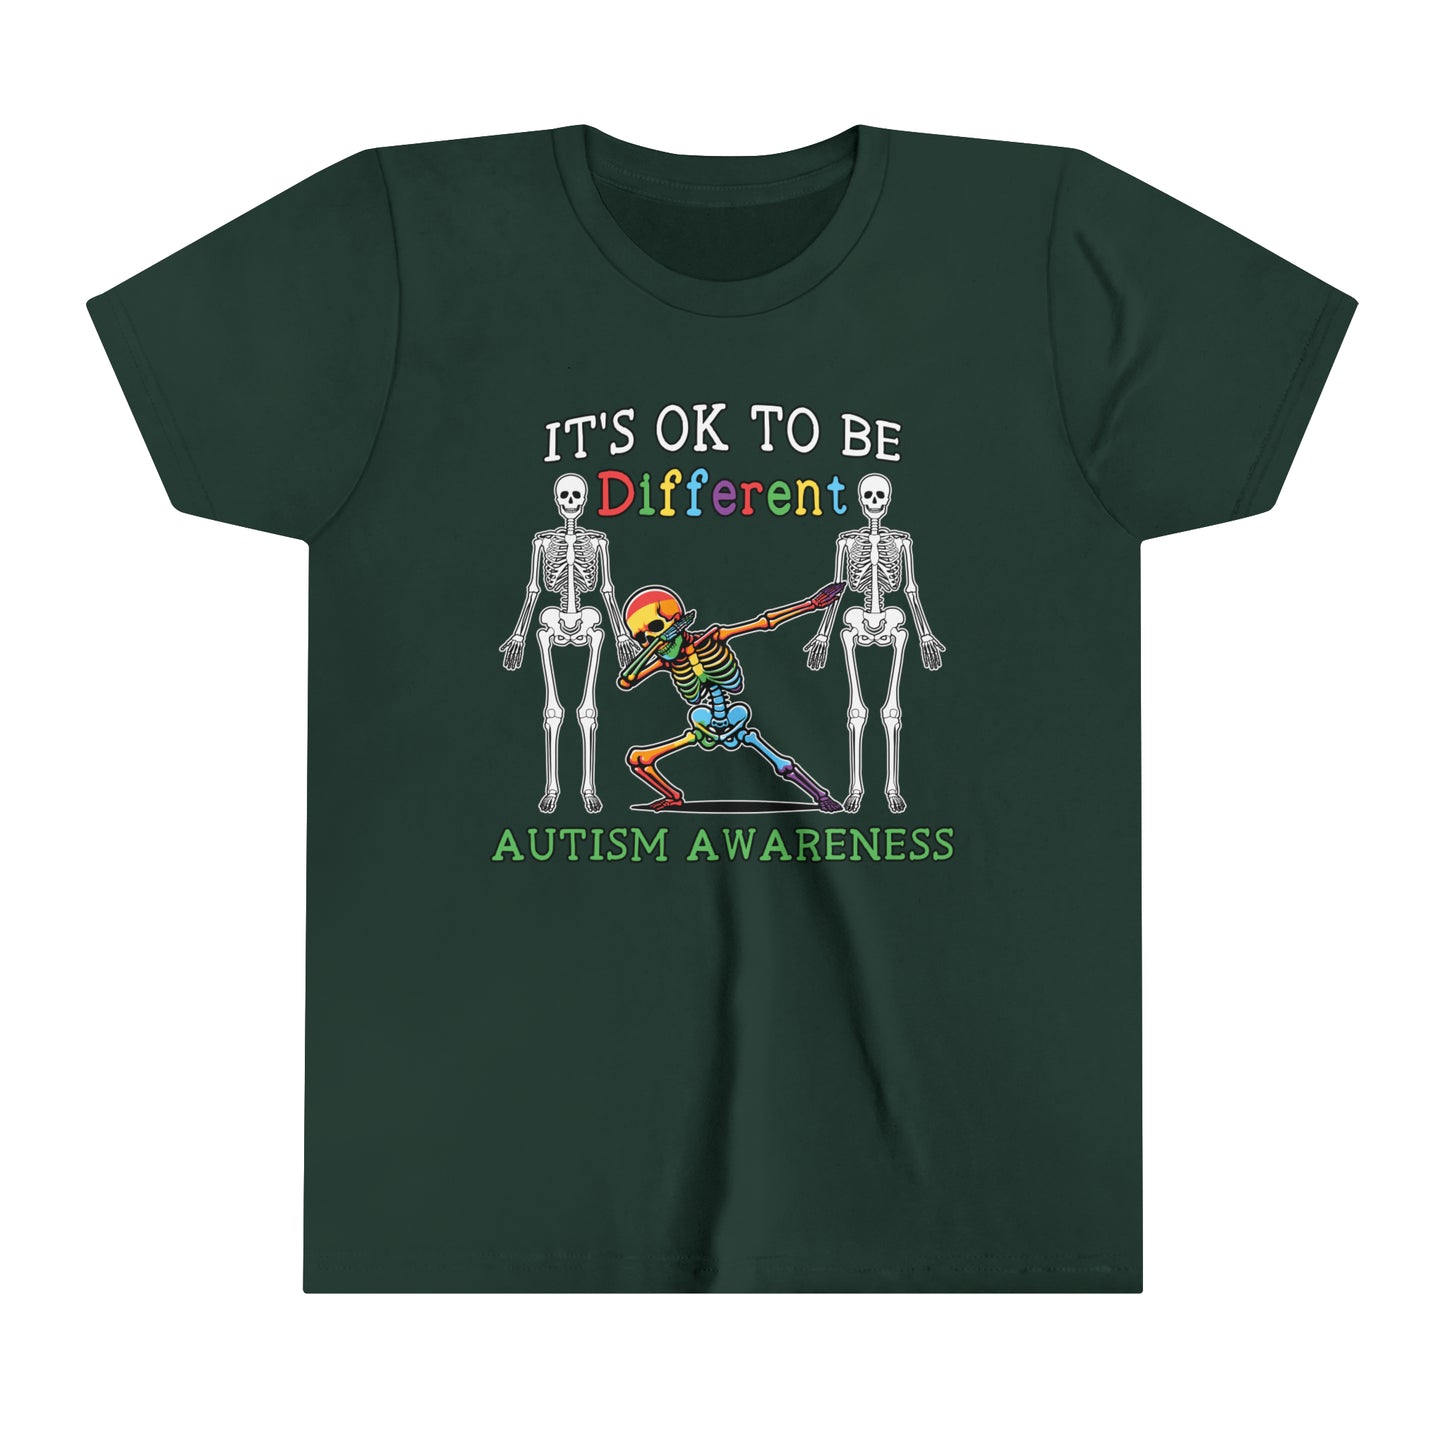 It's OK to be different autism awareness, youth shirt